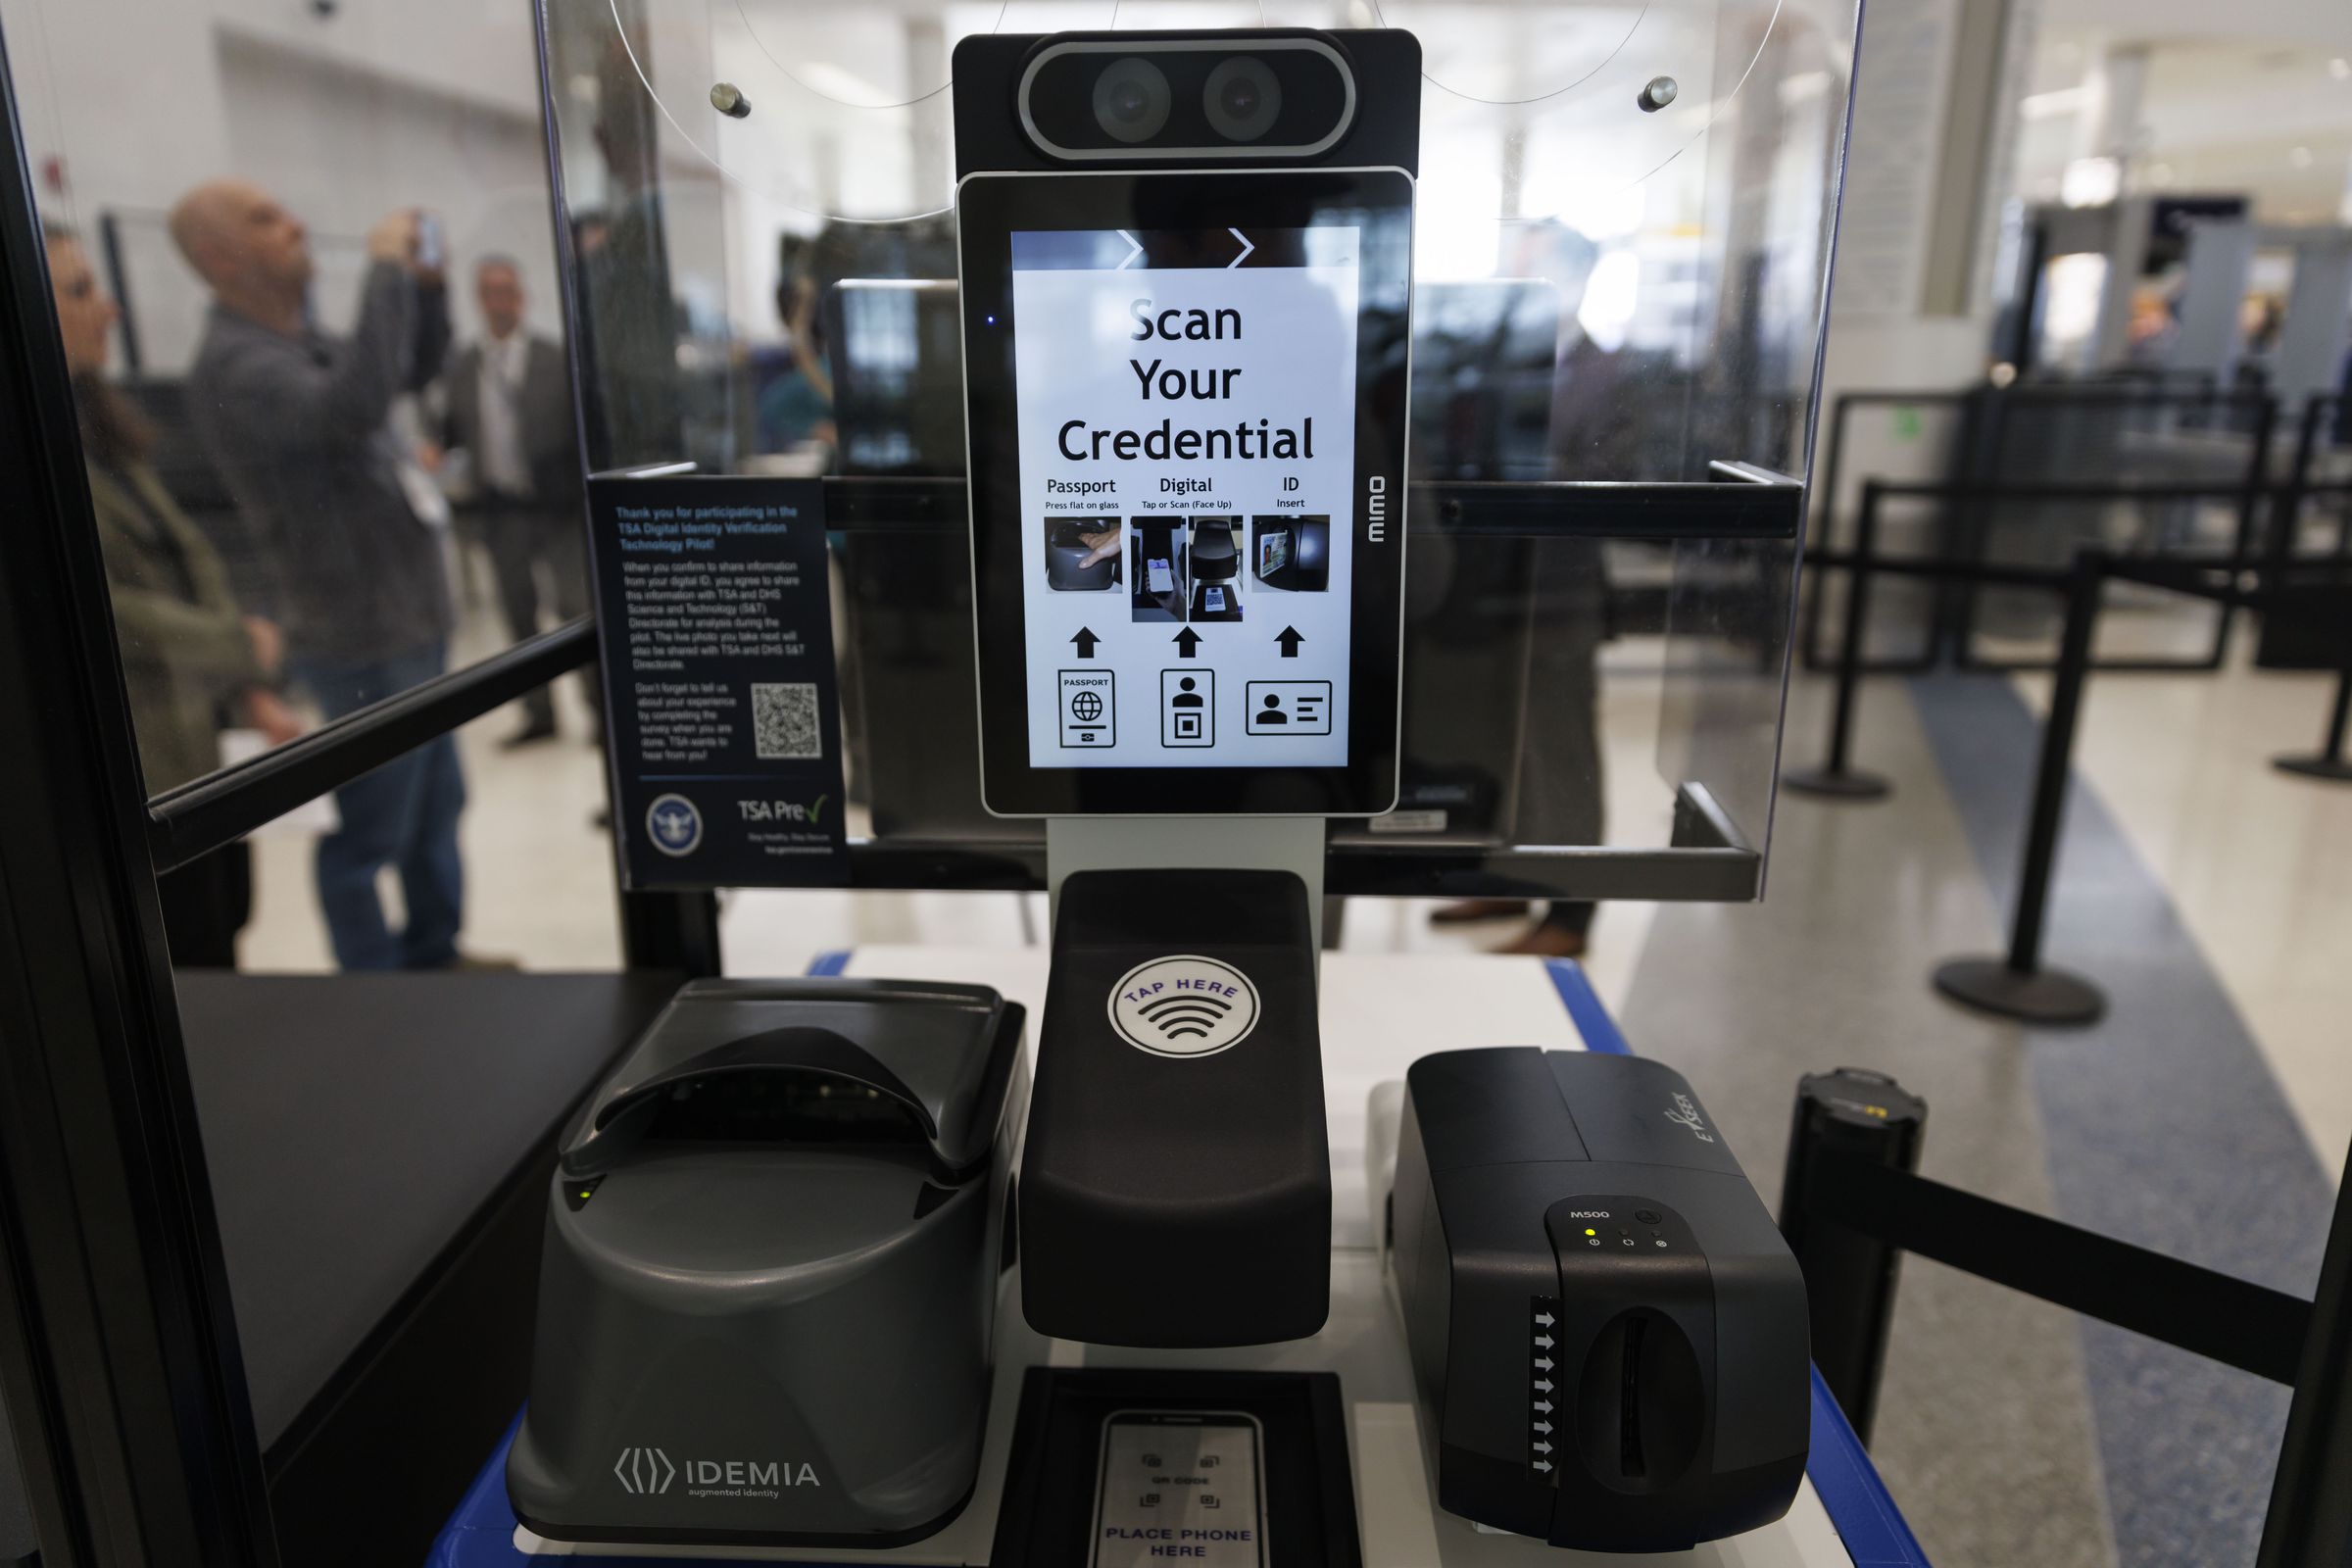 A Credential Authentication Technology (CAT-2) identity verification machine at a Transportation Security Administration (TSA) security checkpoint